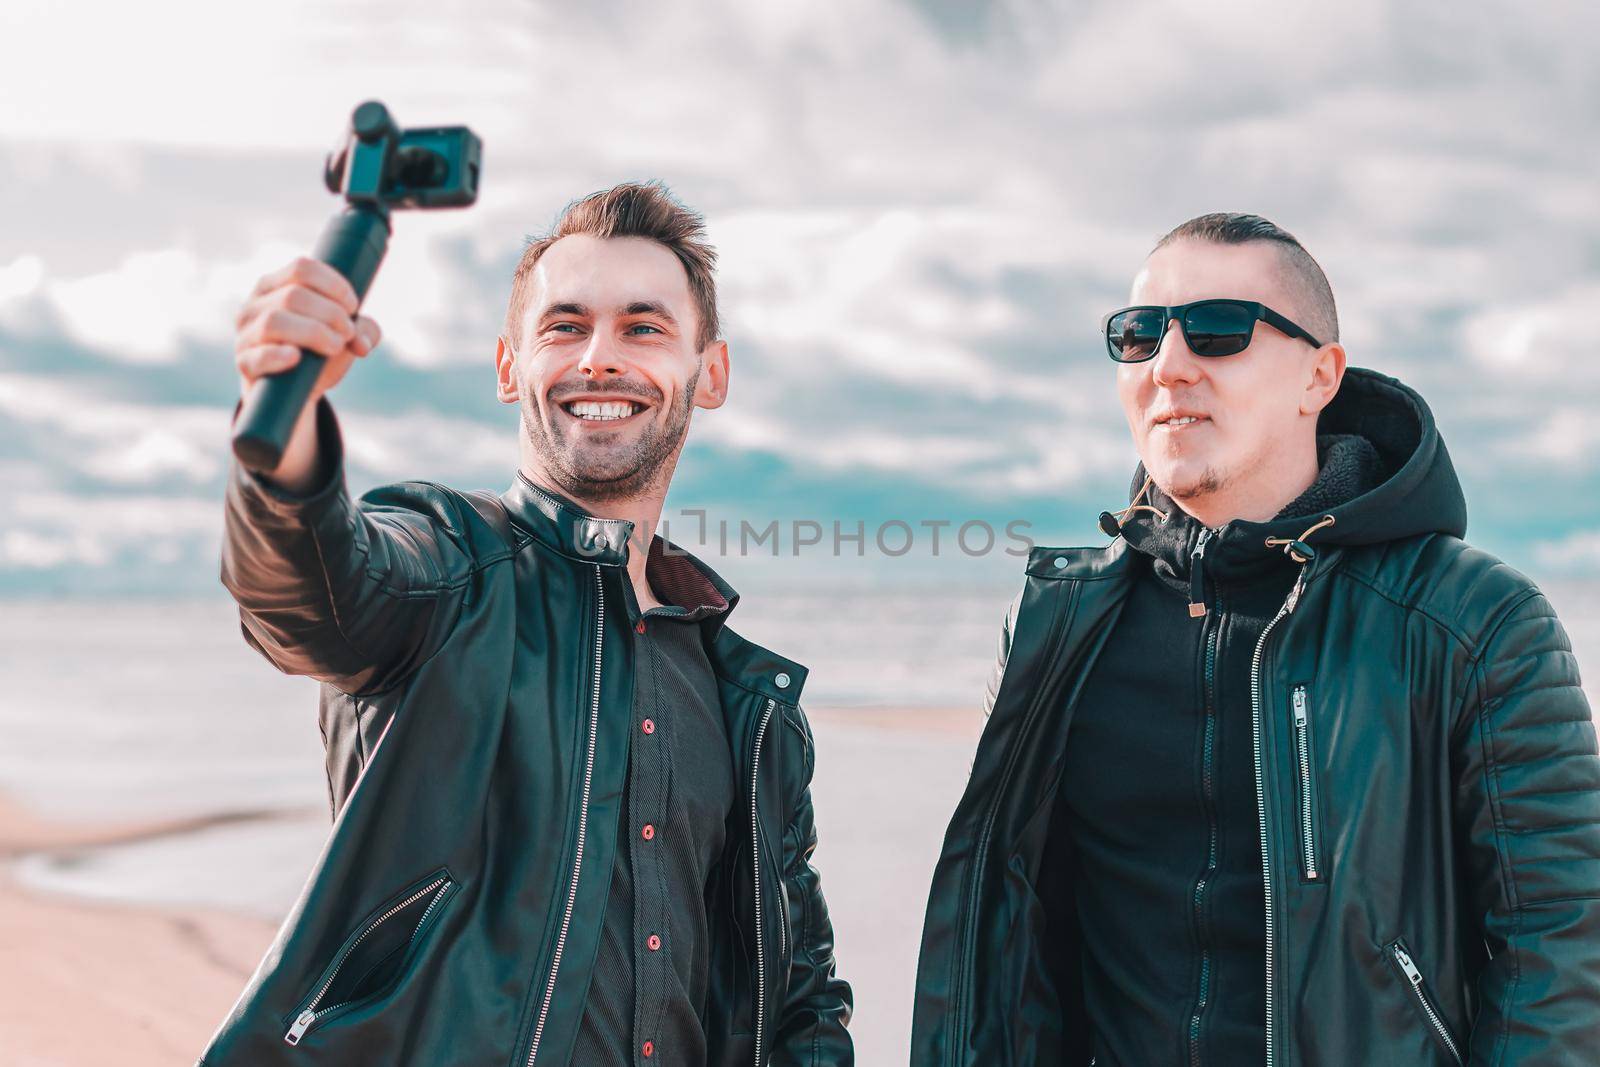 Two Handsome Smiling Friends Making Selfie Using Action Camera with Gimbal Stabilizer at the Beach. Youthful Men in Black Clothes Having Fun by Making Photos